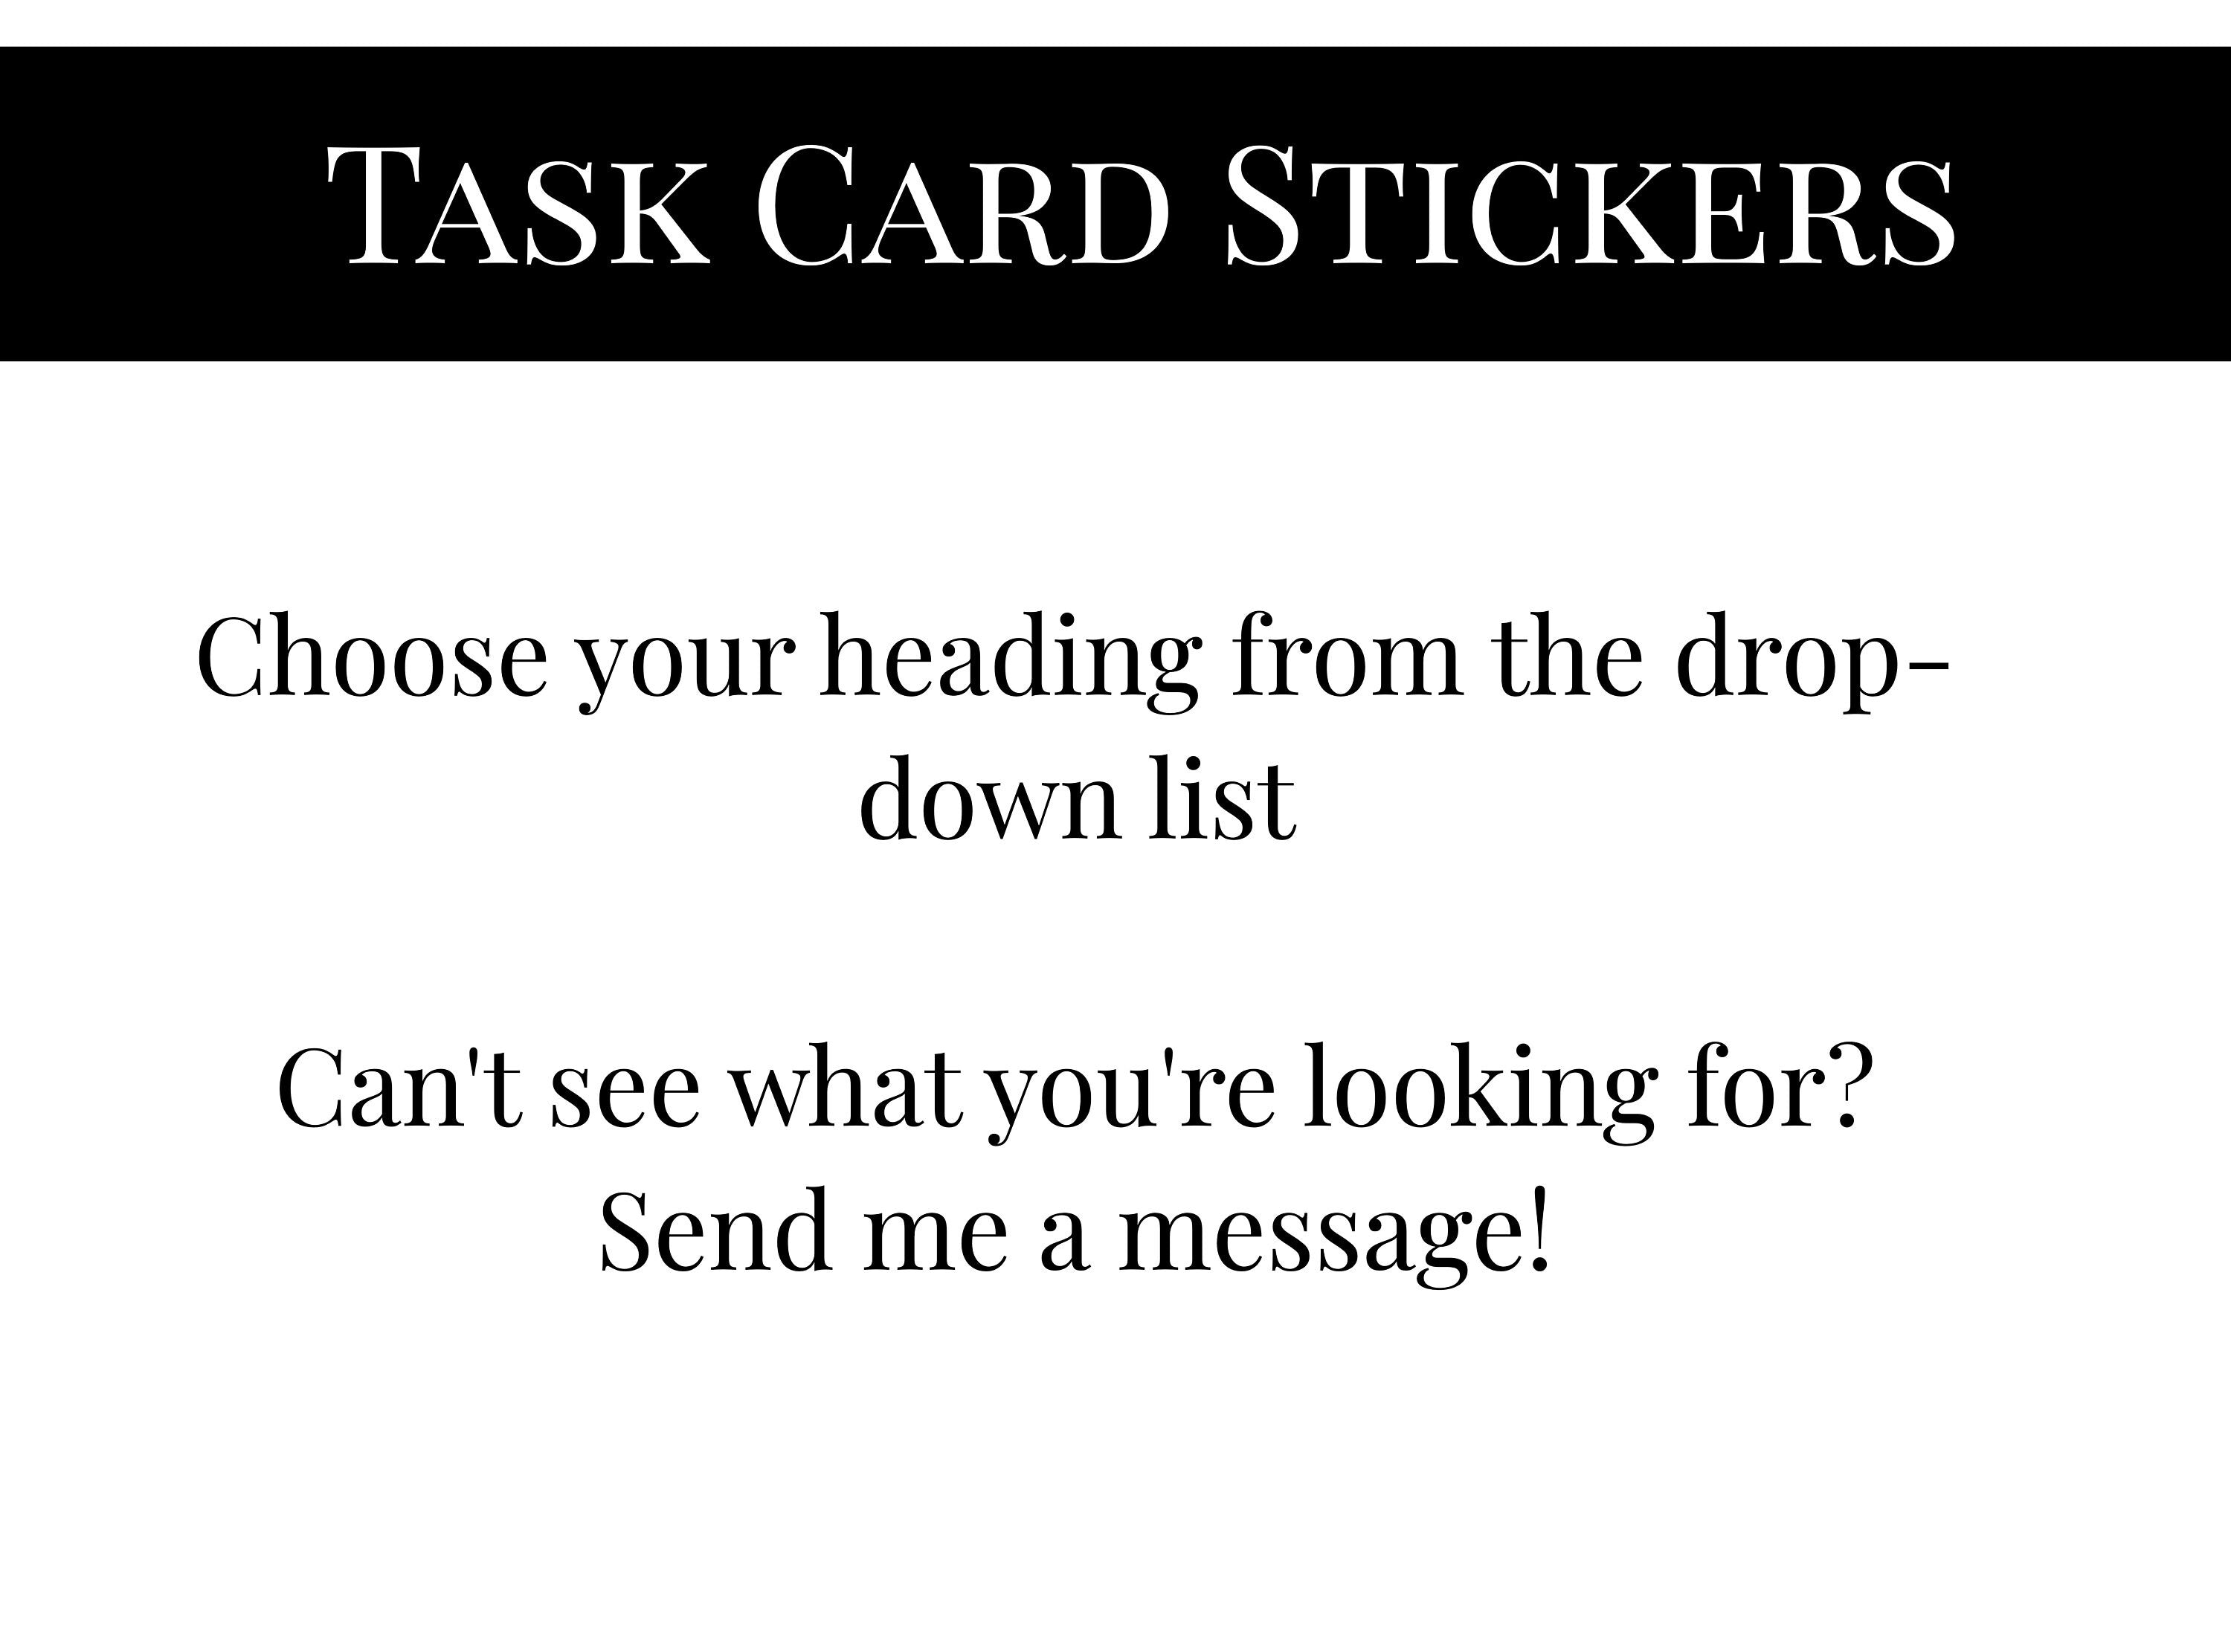 Task Card Sticker - Single Sticker for Credit Card Size Cards